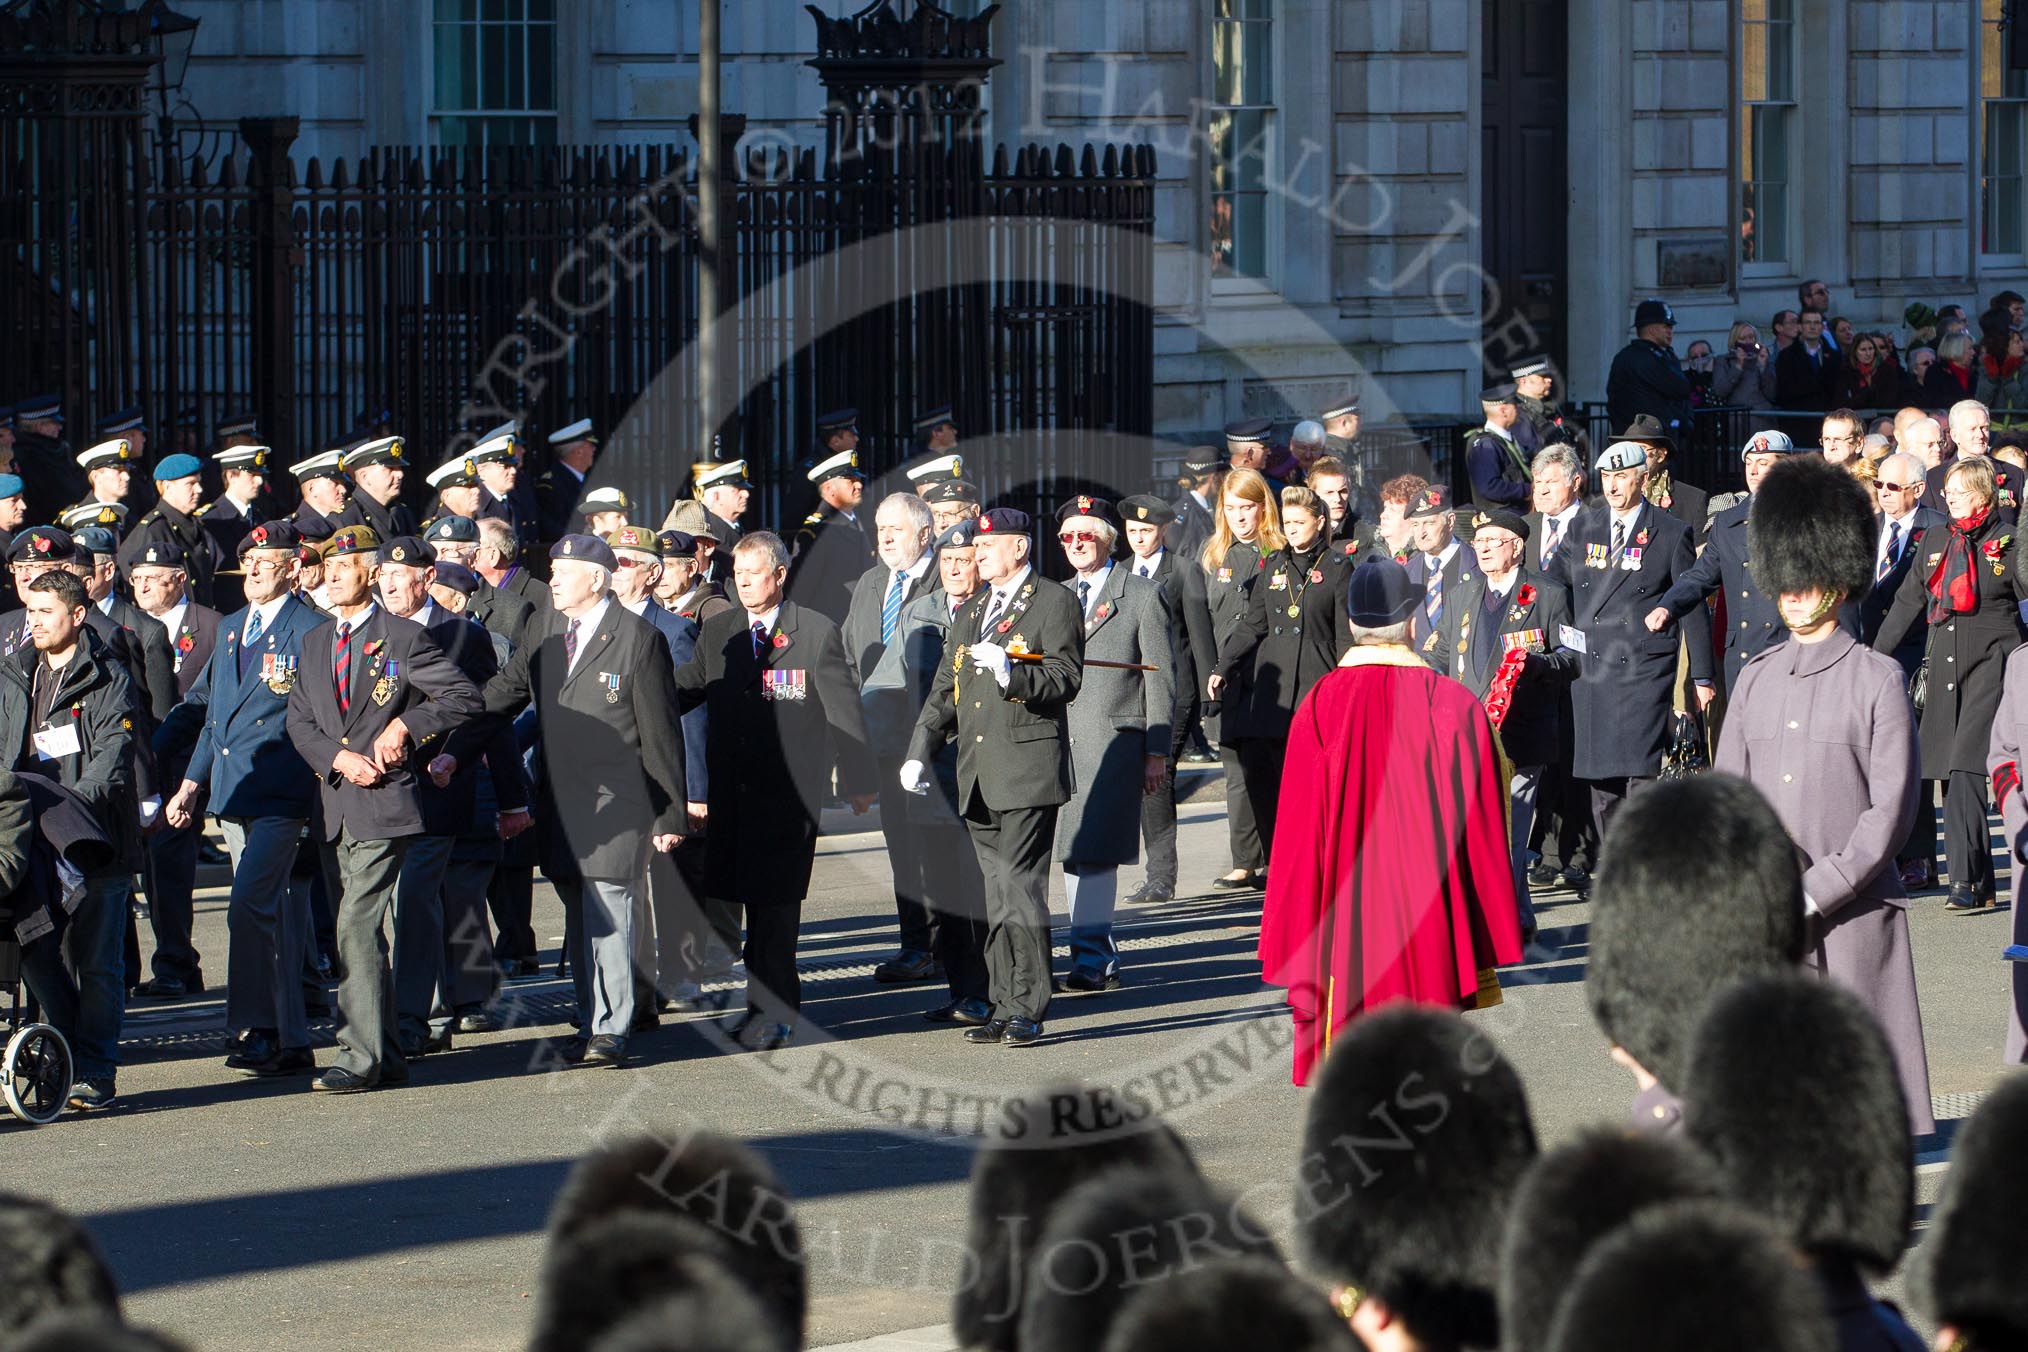 Remembrance Sunday 2012 Cenotaph March Past: Group F10 - National Service Veterans Alliance and F11 - Italy Star Association..
Whitehall, Cenotaph,
London SW1,

United Kingdom,
on 11 November 2012 at 11:46, image #452